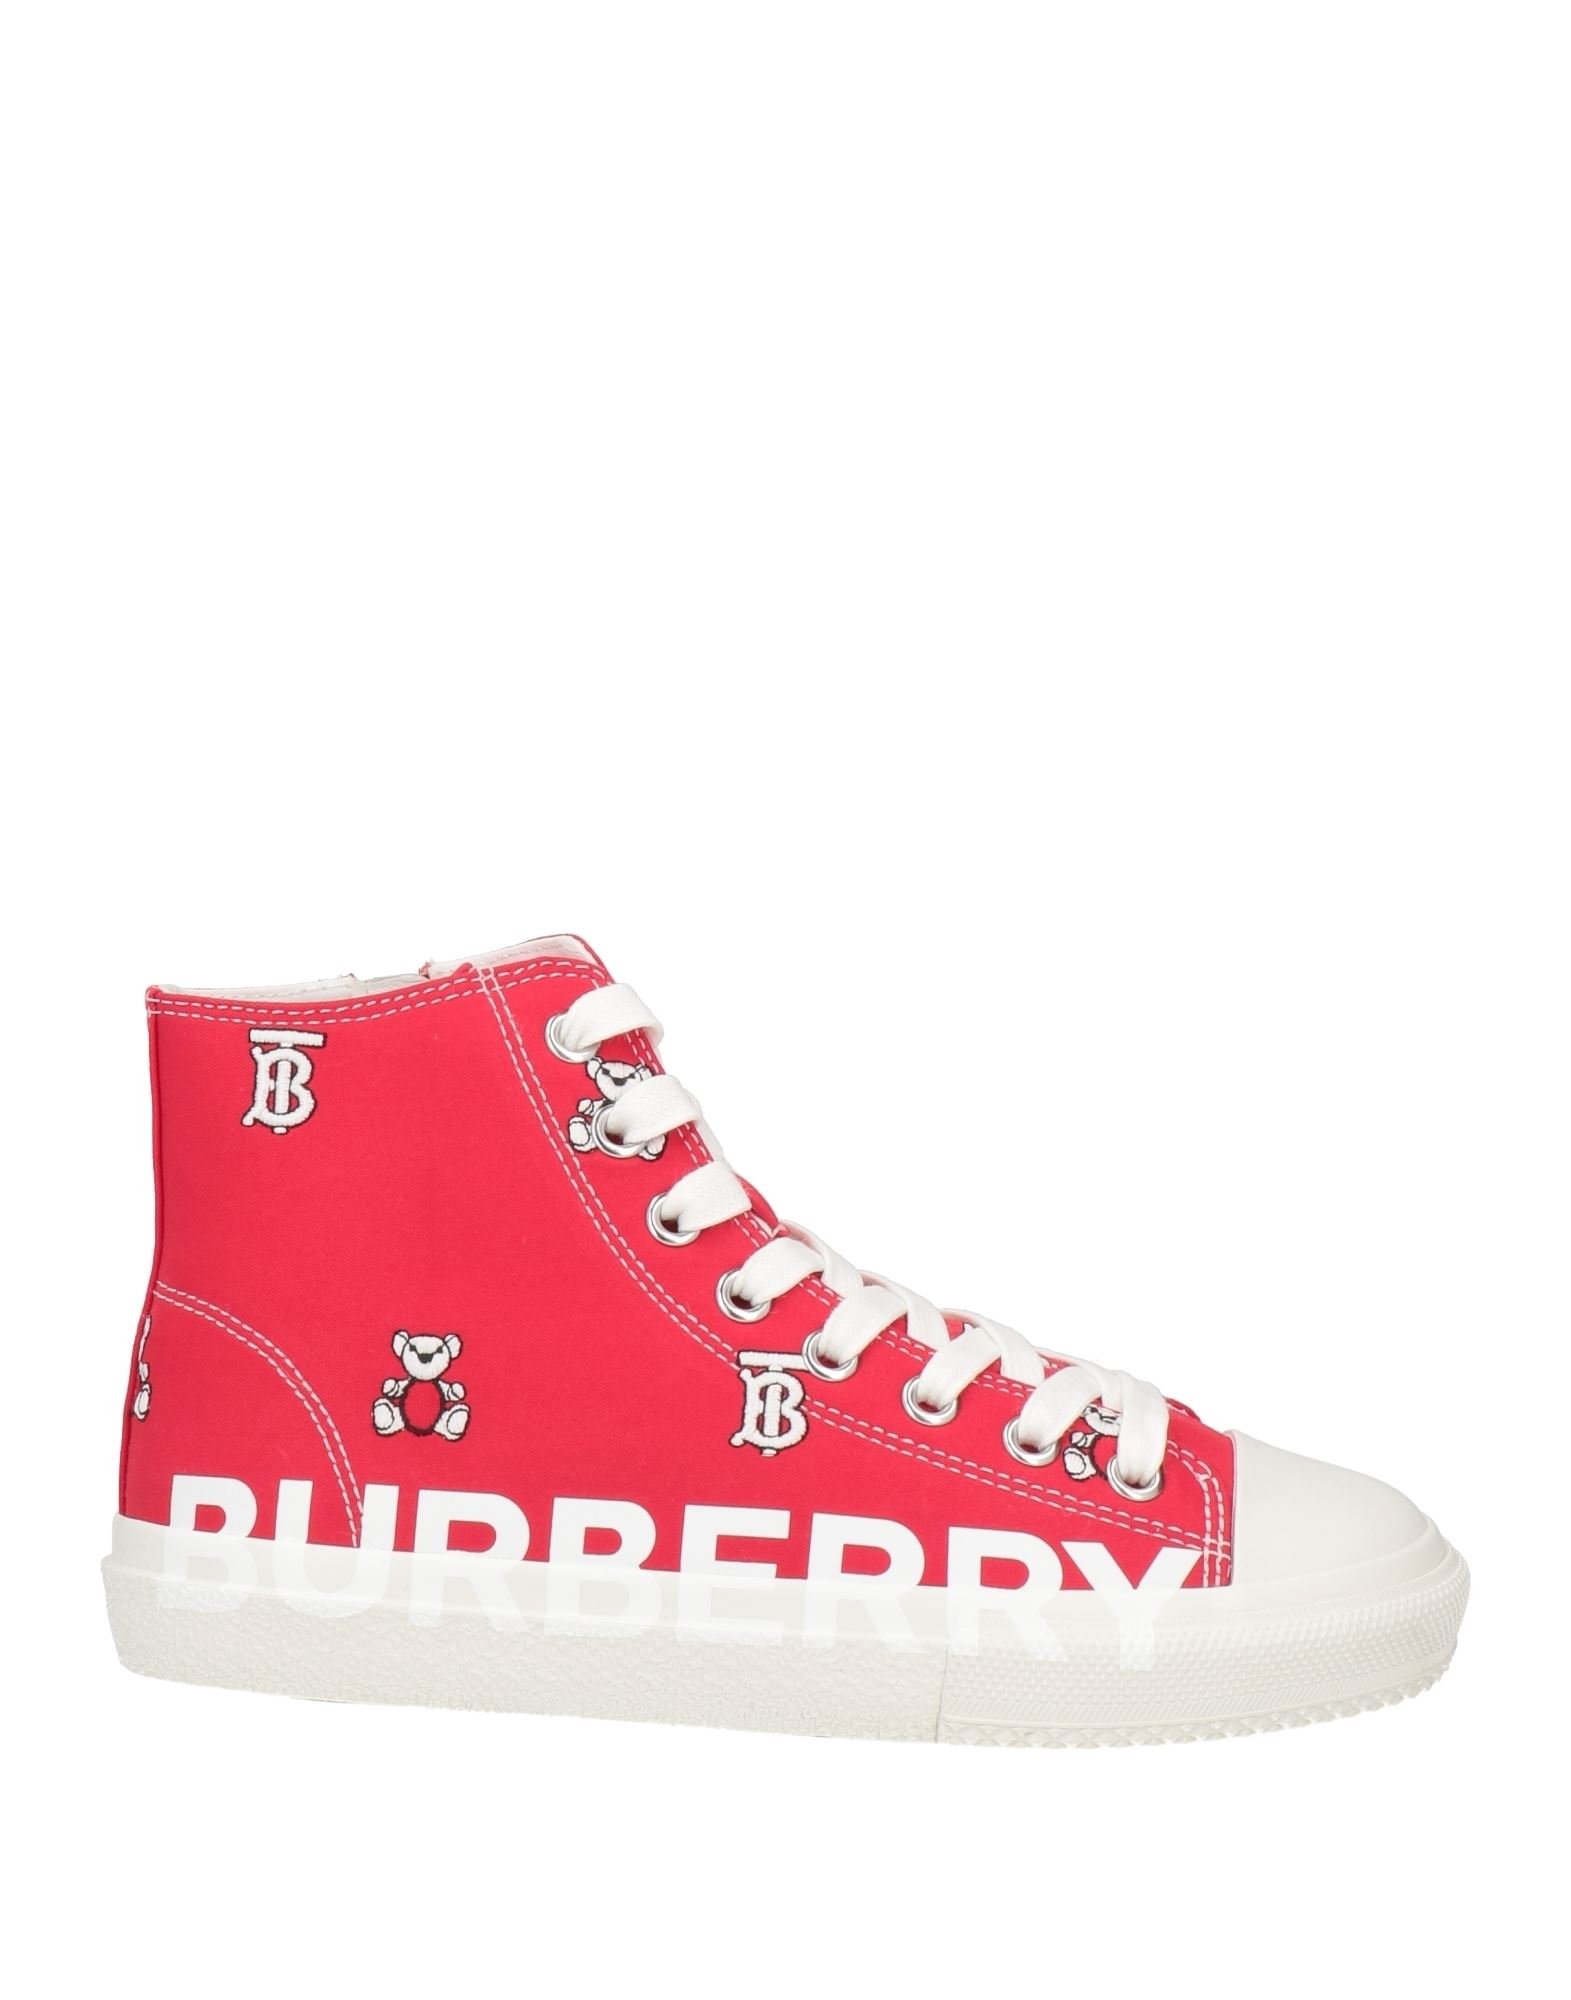 BURBERRY Sneakers Kinder Rot von BURBERRY